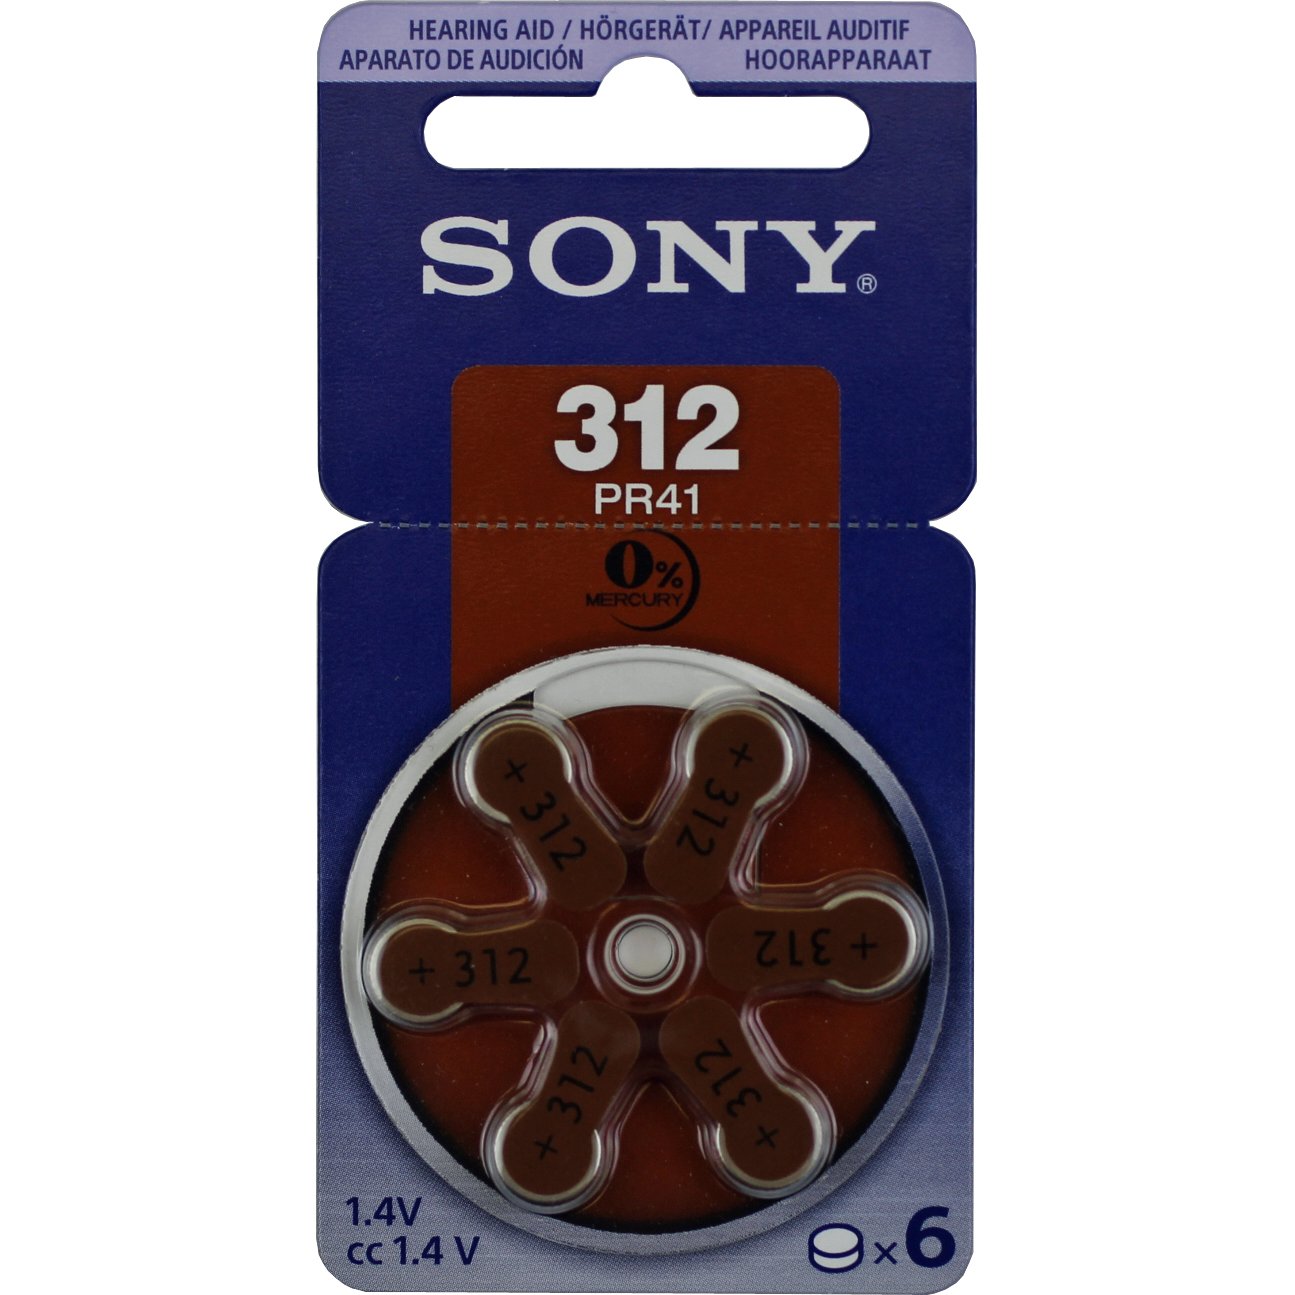 Size 312 Hearing Aid Batteries